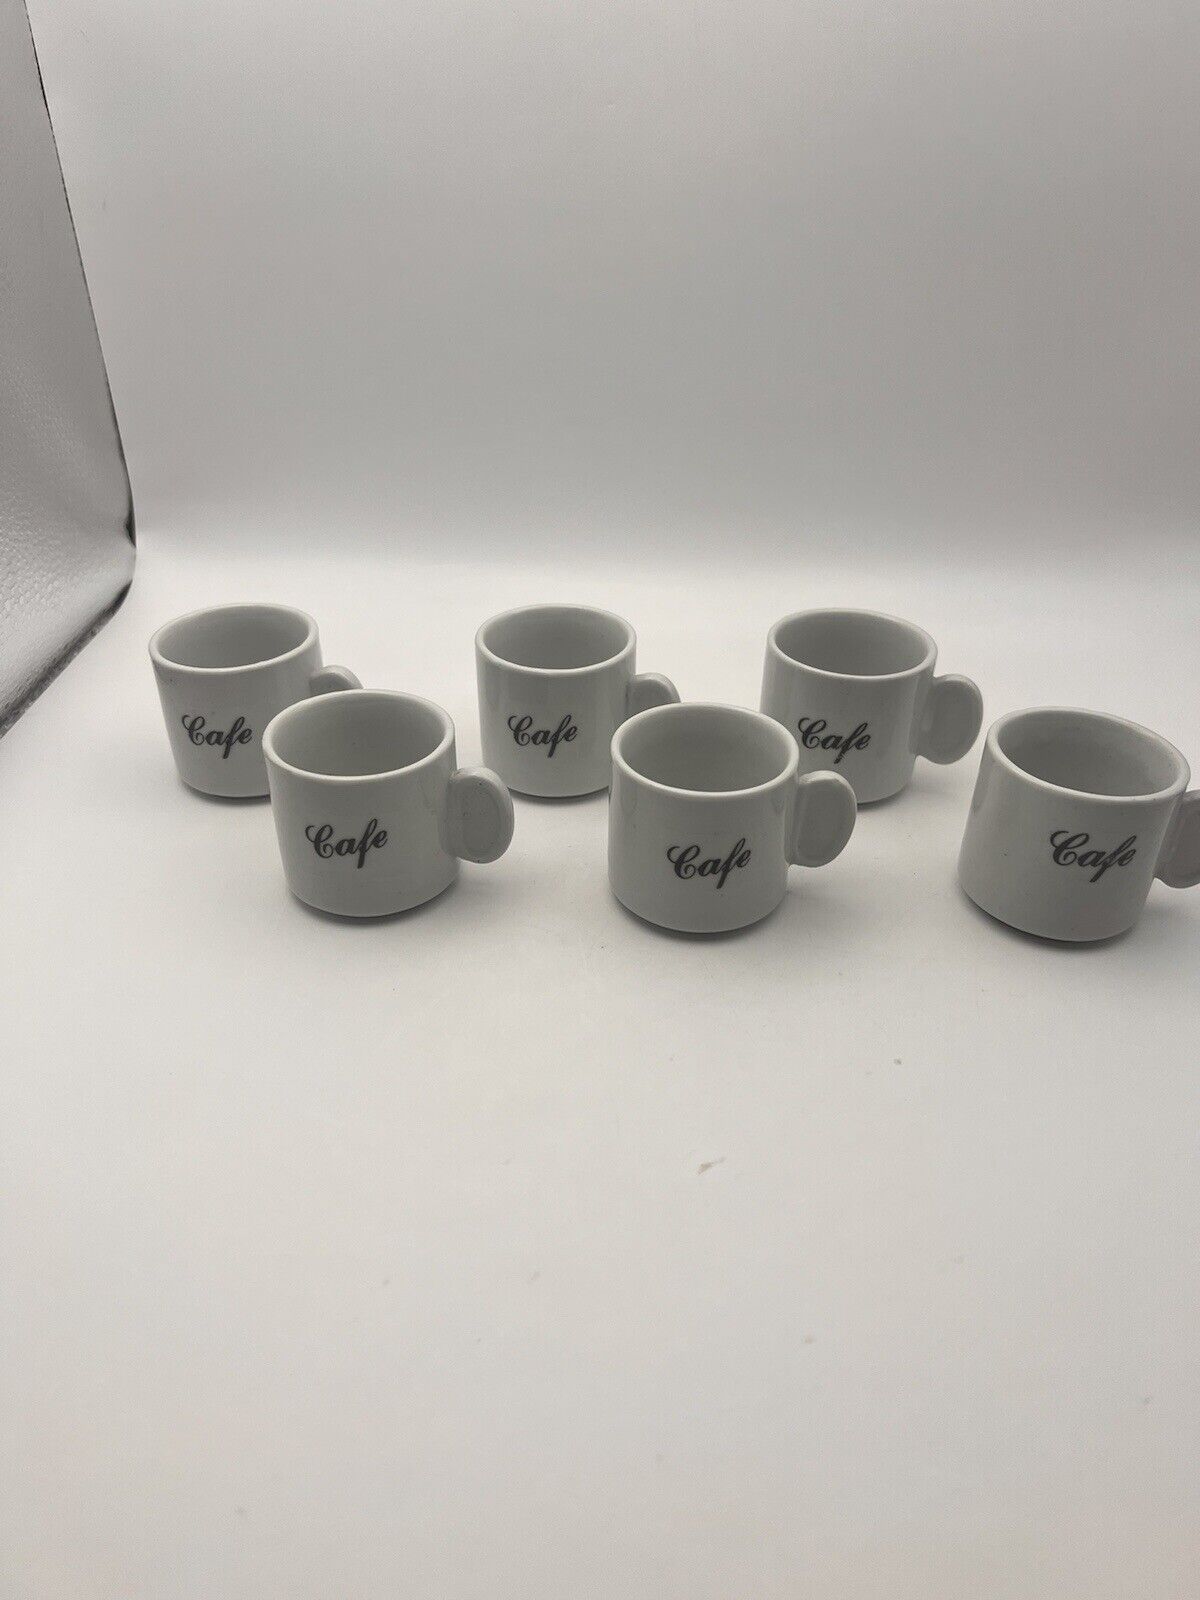 Vintage Excel  Expresso “Café” Lot of 6 White Small Stacking Coffee Cups China